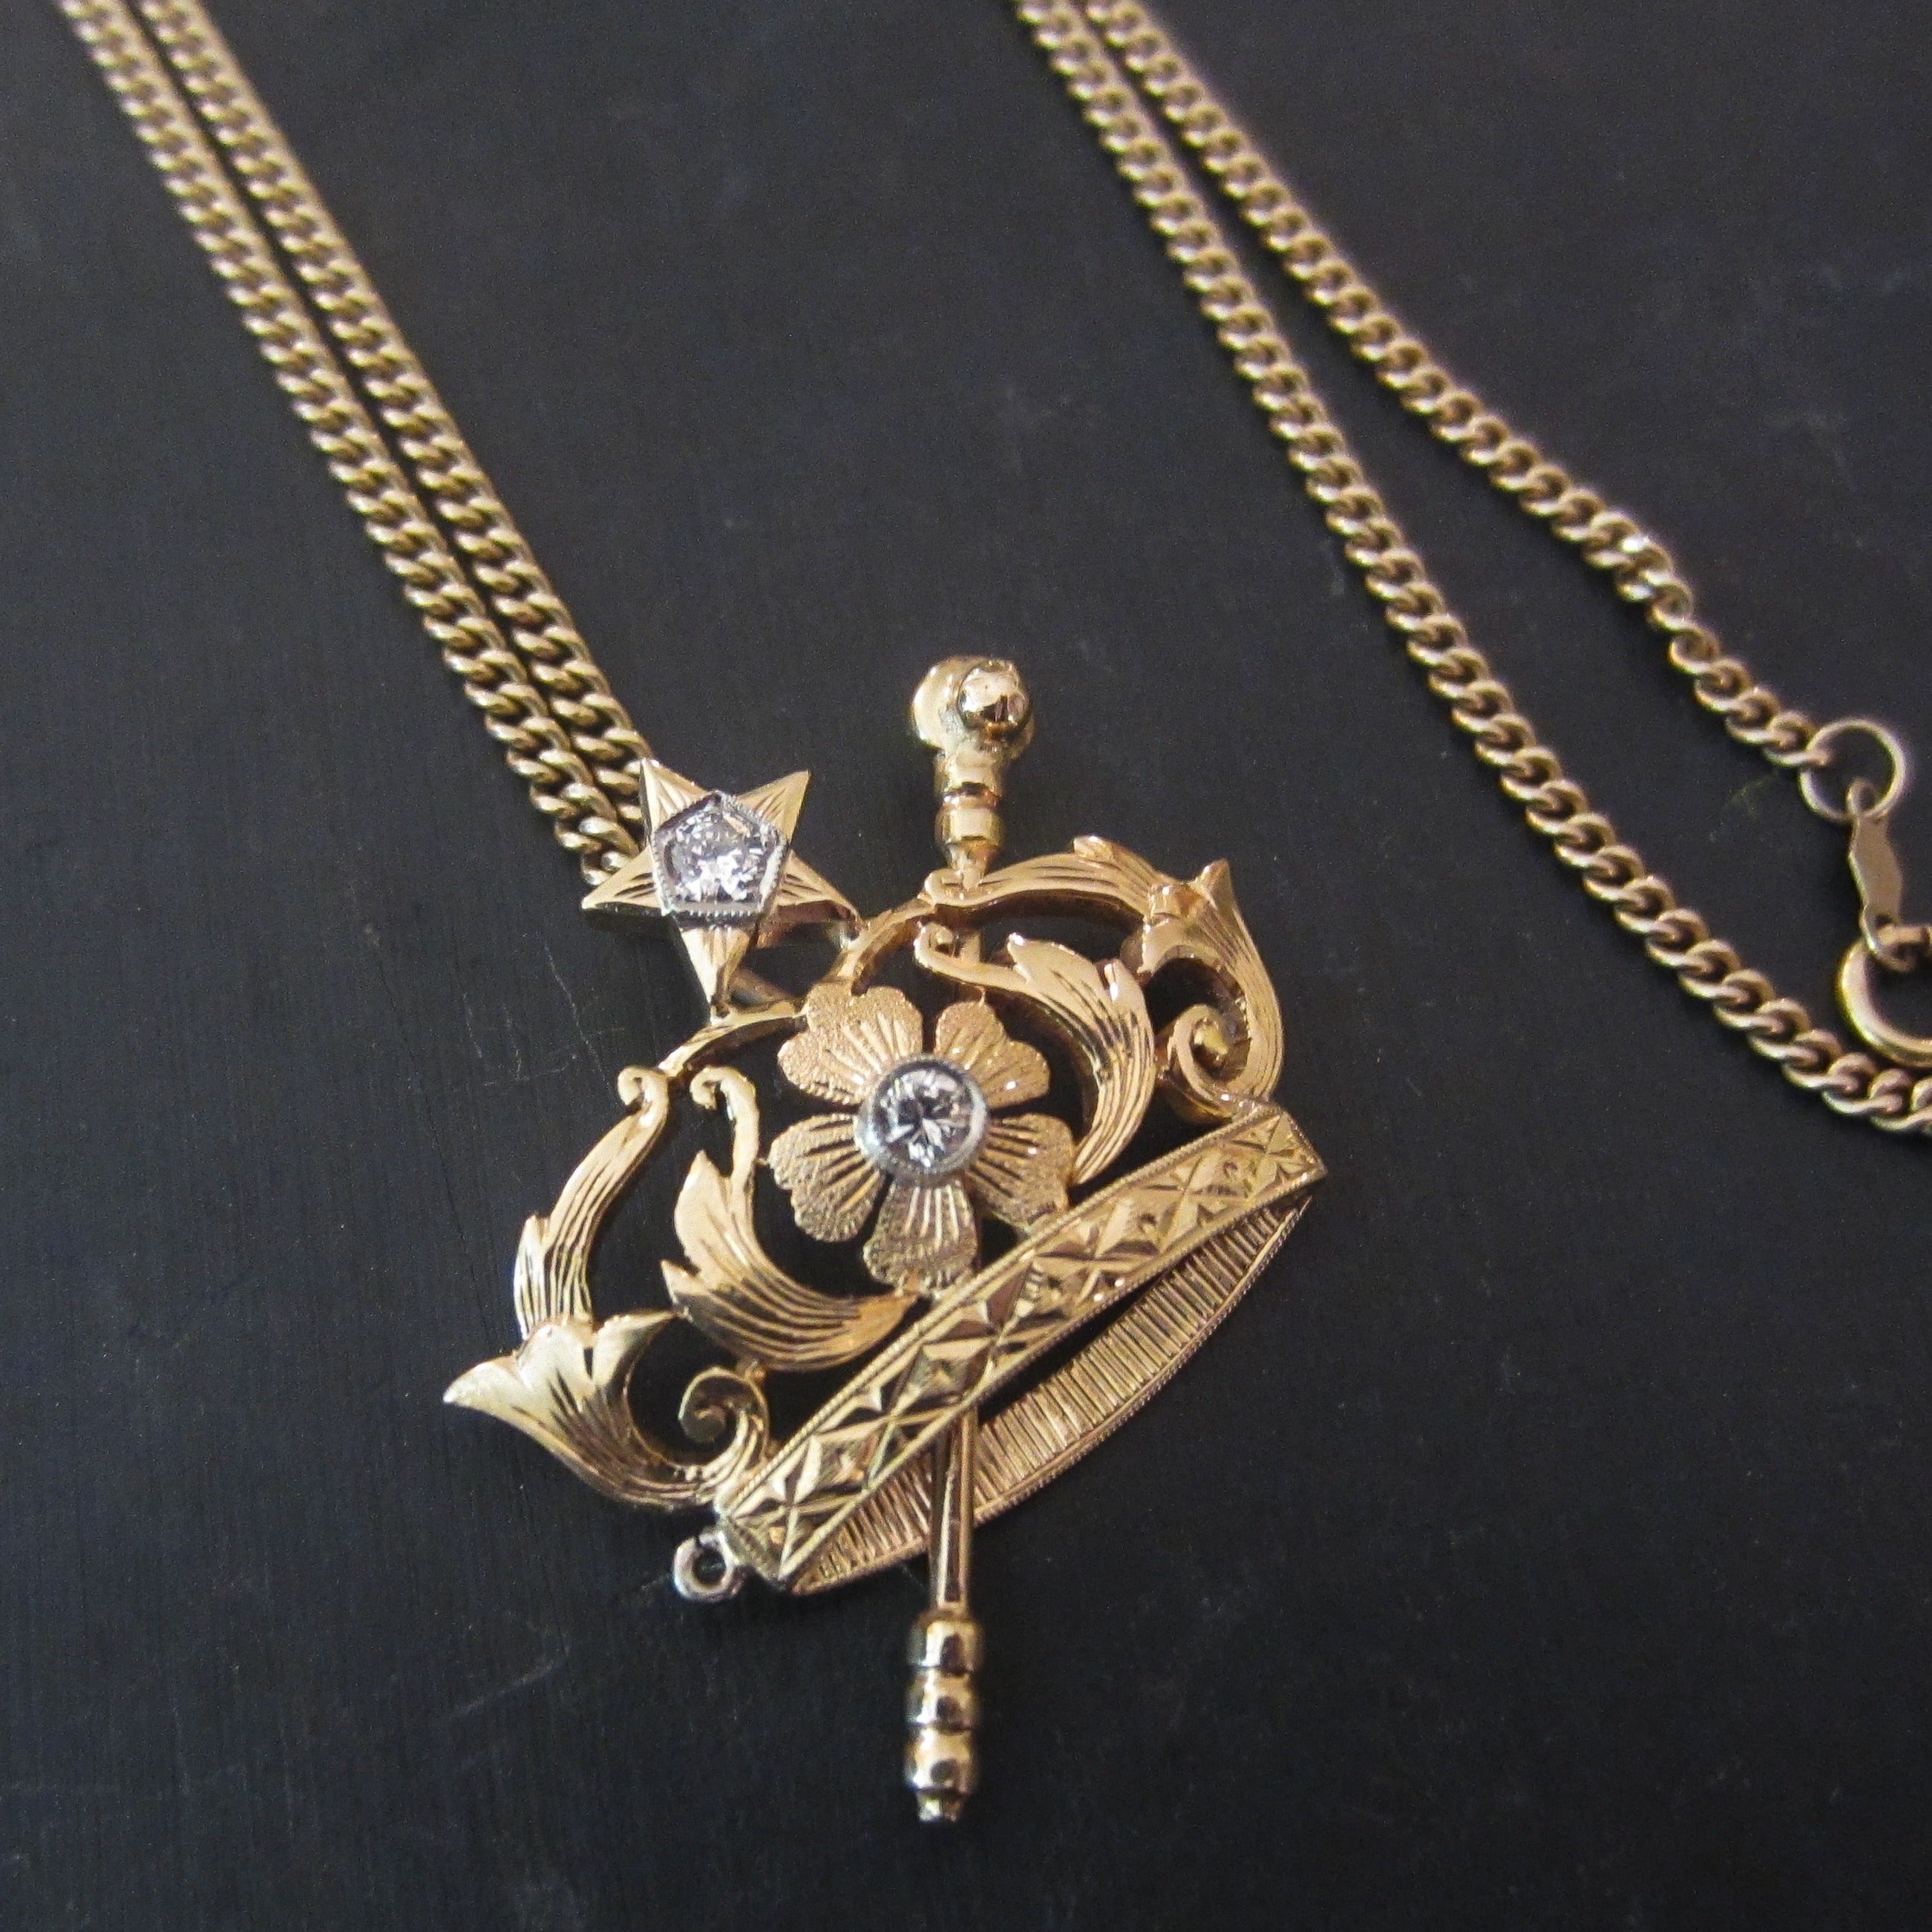 Jewelry necklace in style of Nami from LOL by Coolarts223 on DeviantArt